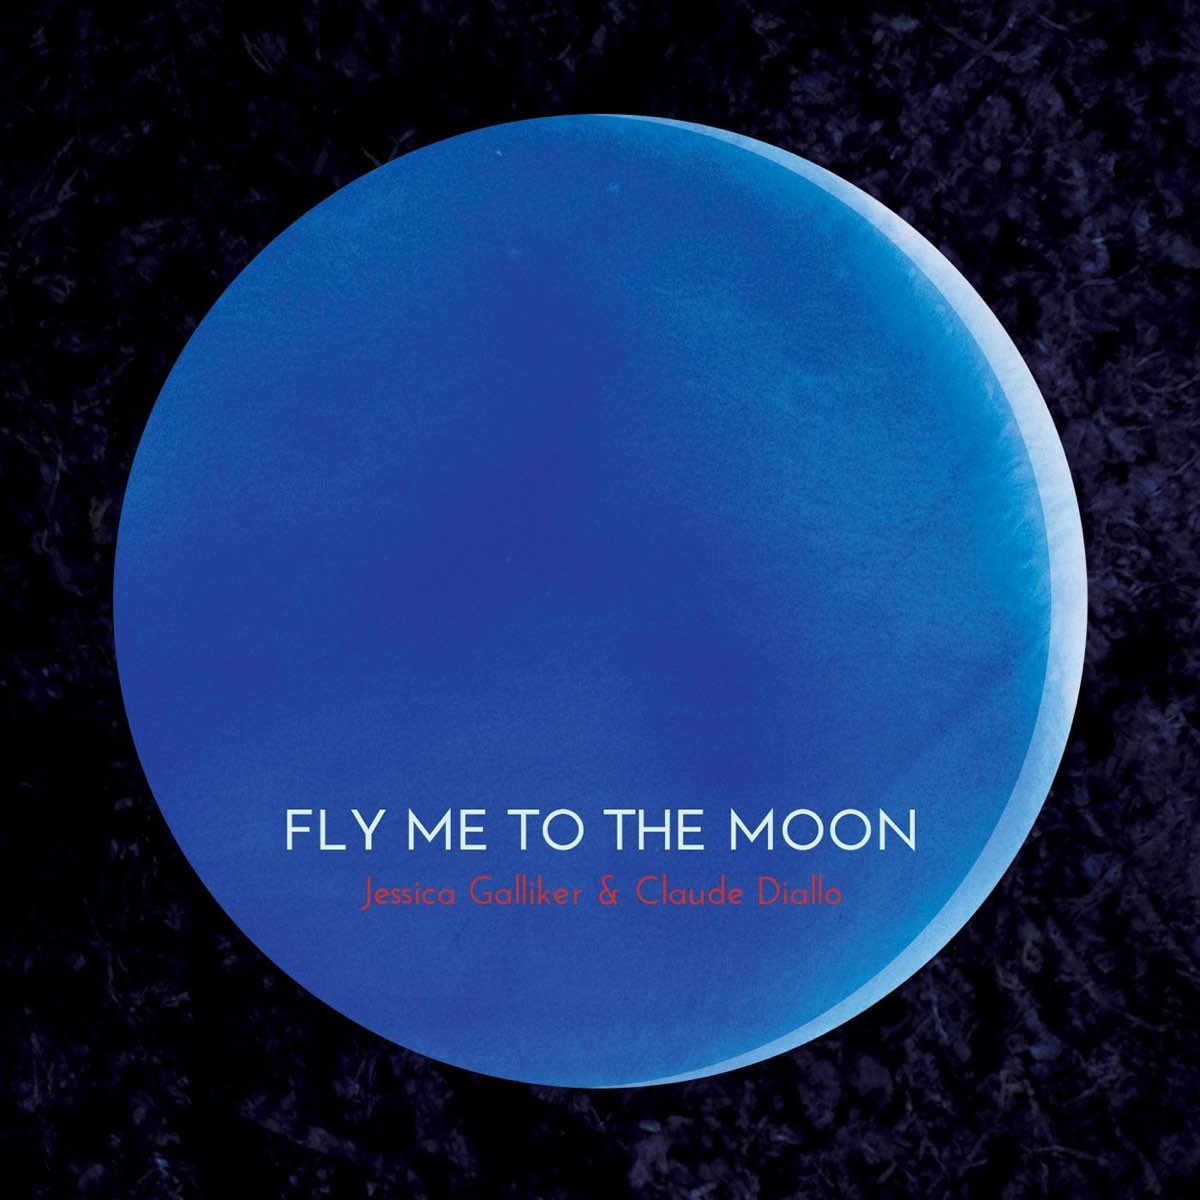 Fly the moon слушать. Fly to the Moon. Fly me to the Moon. Fly me to the Moon обложка. Fly me to the Moon песня.